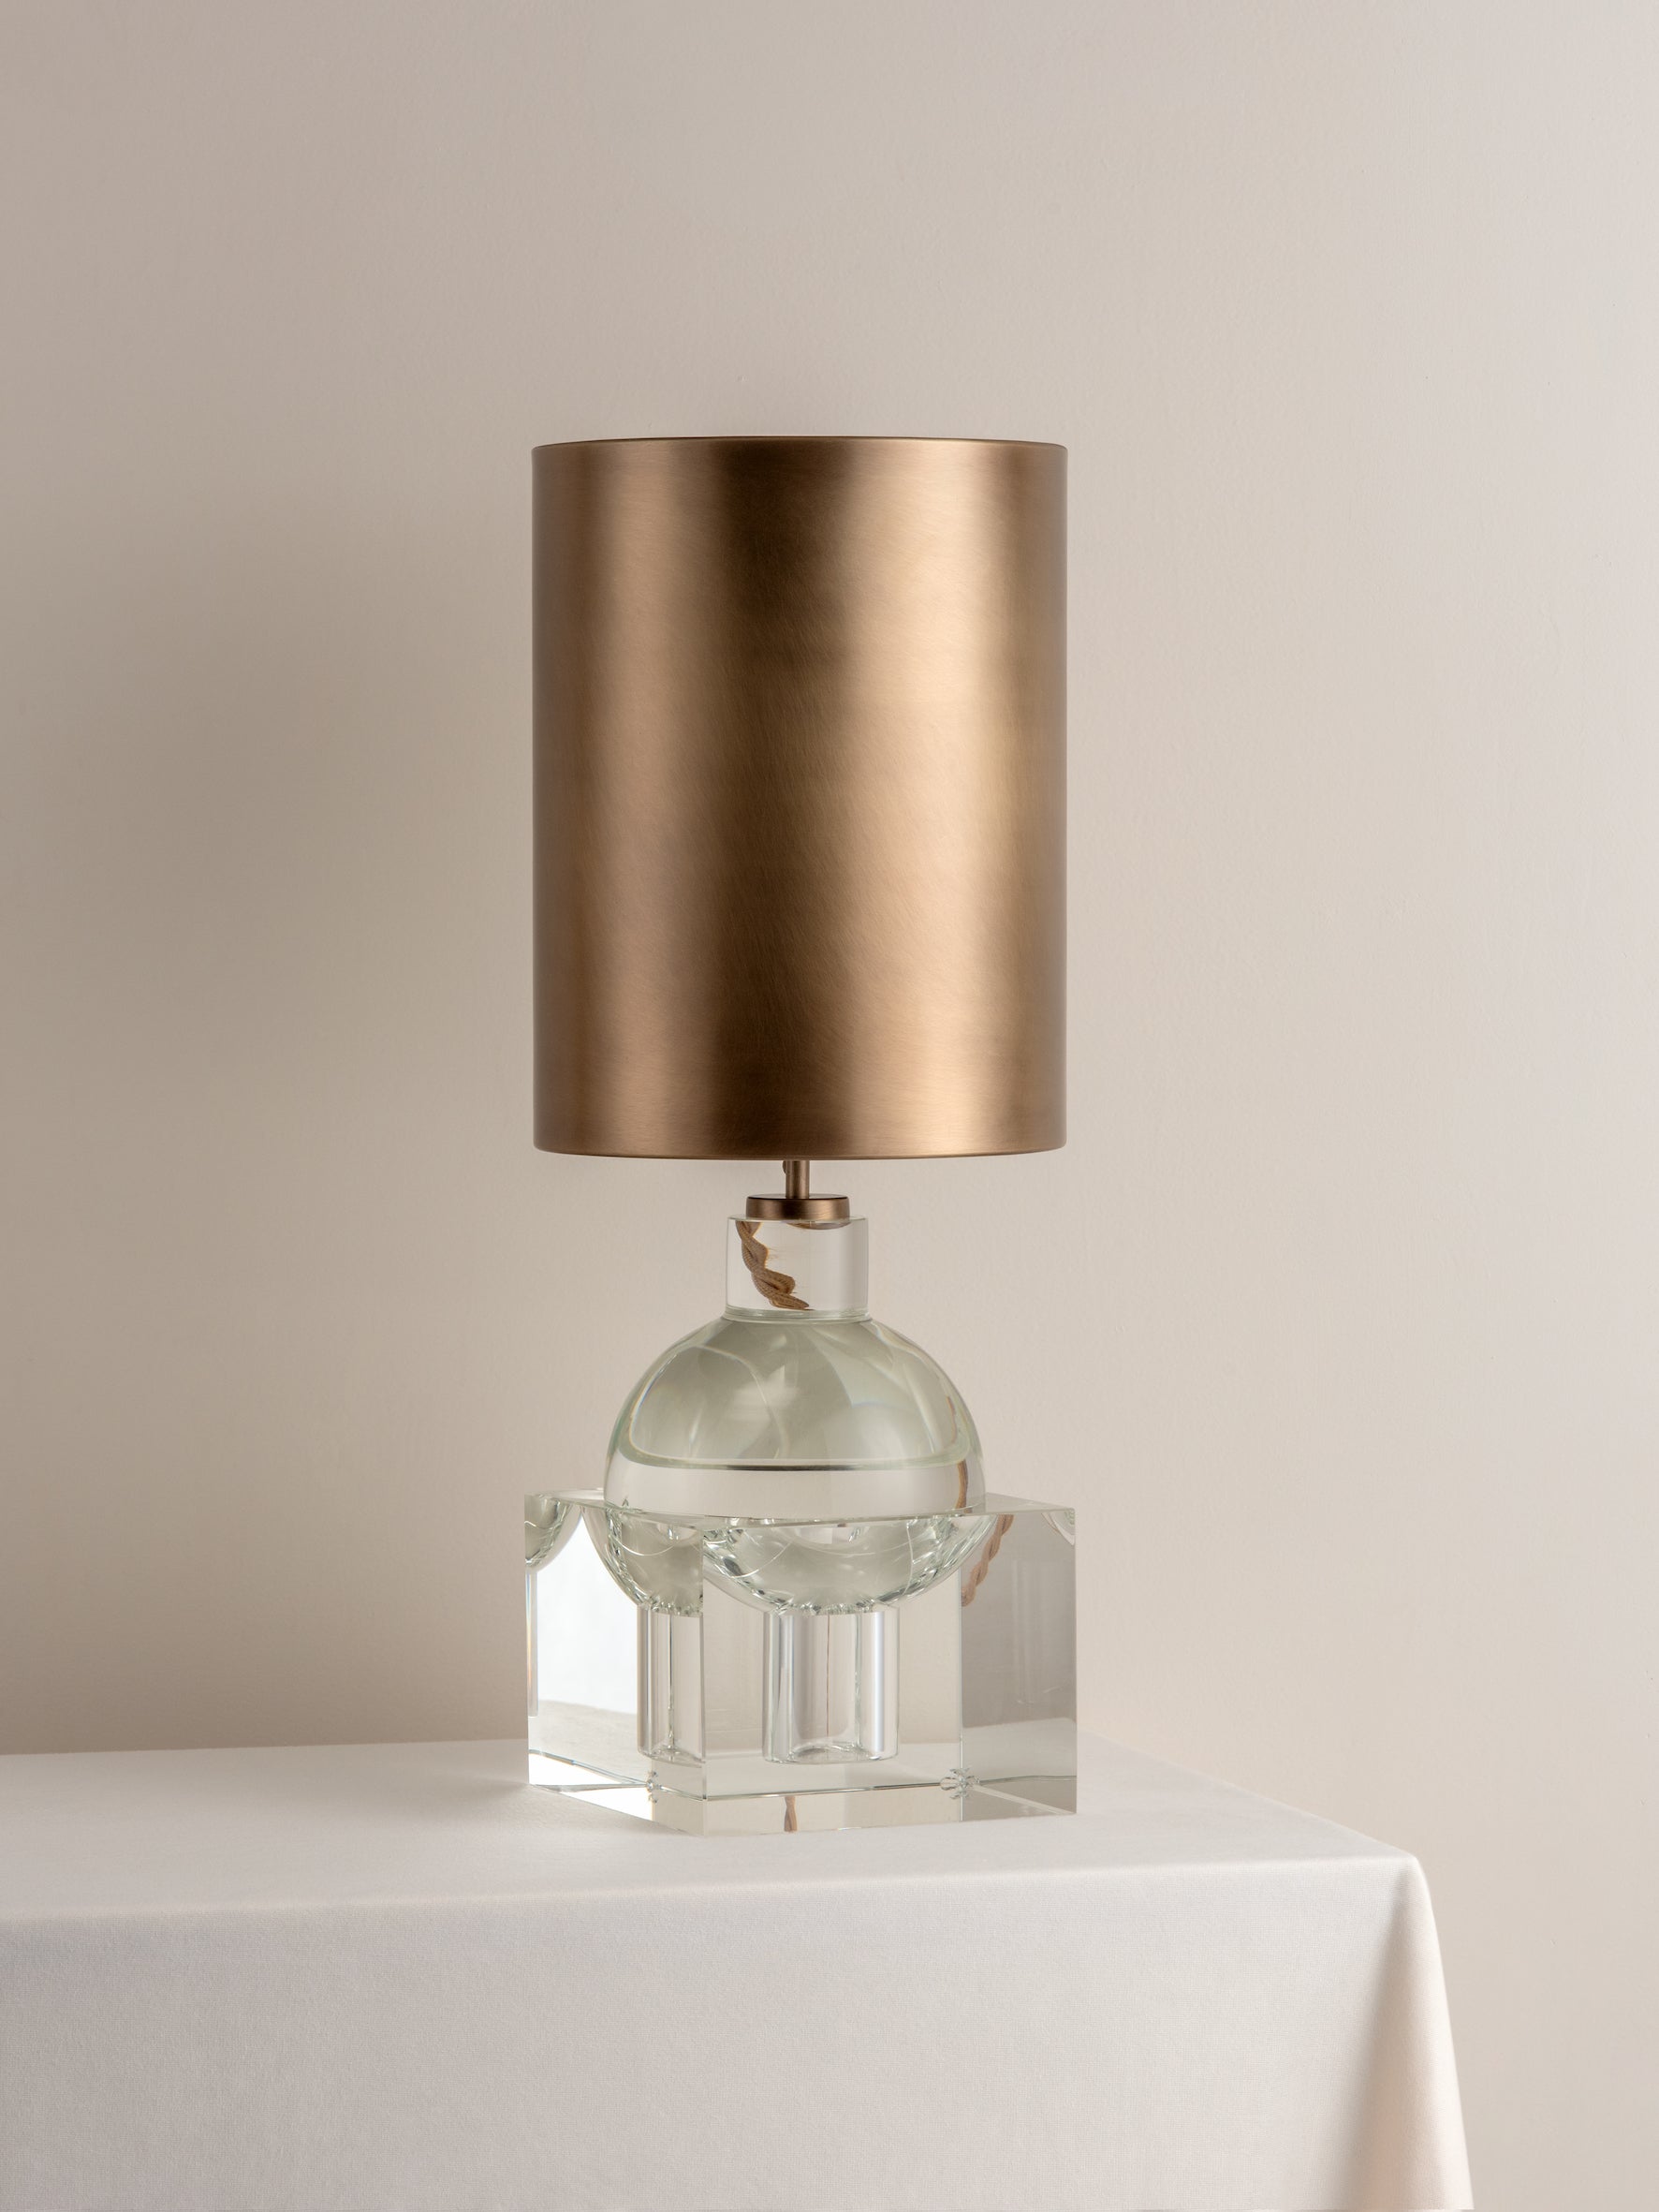 Editions crystal lamp with + aged brass shade | Table Lamp | Lights & Lamps | UK | Modern Affordable Designer Lighting